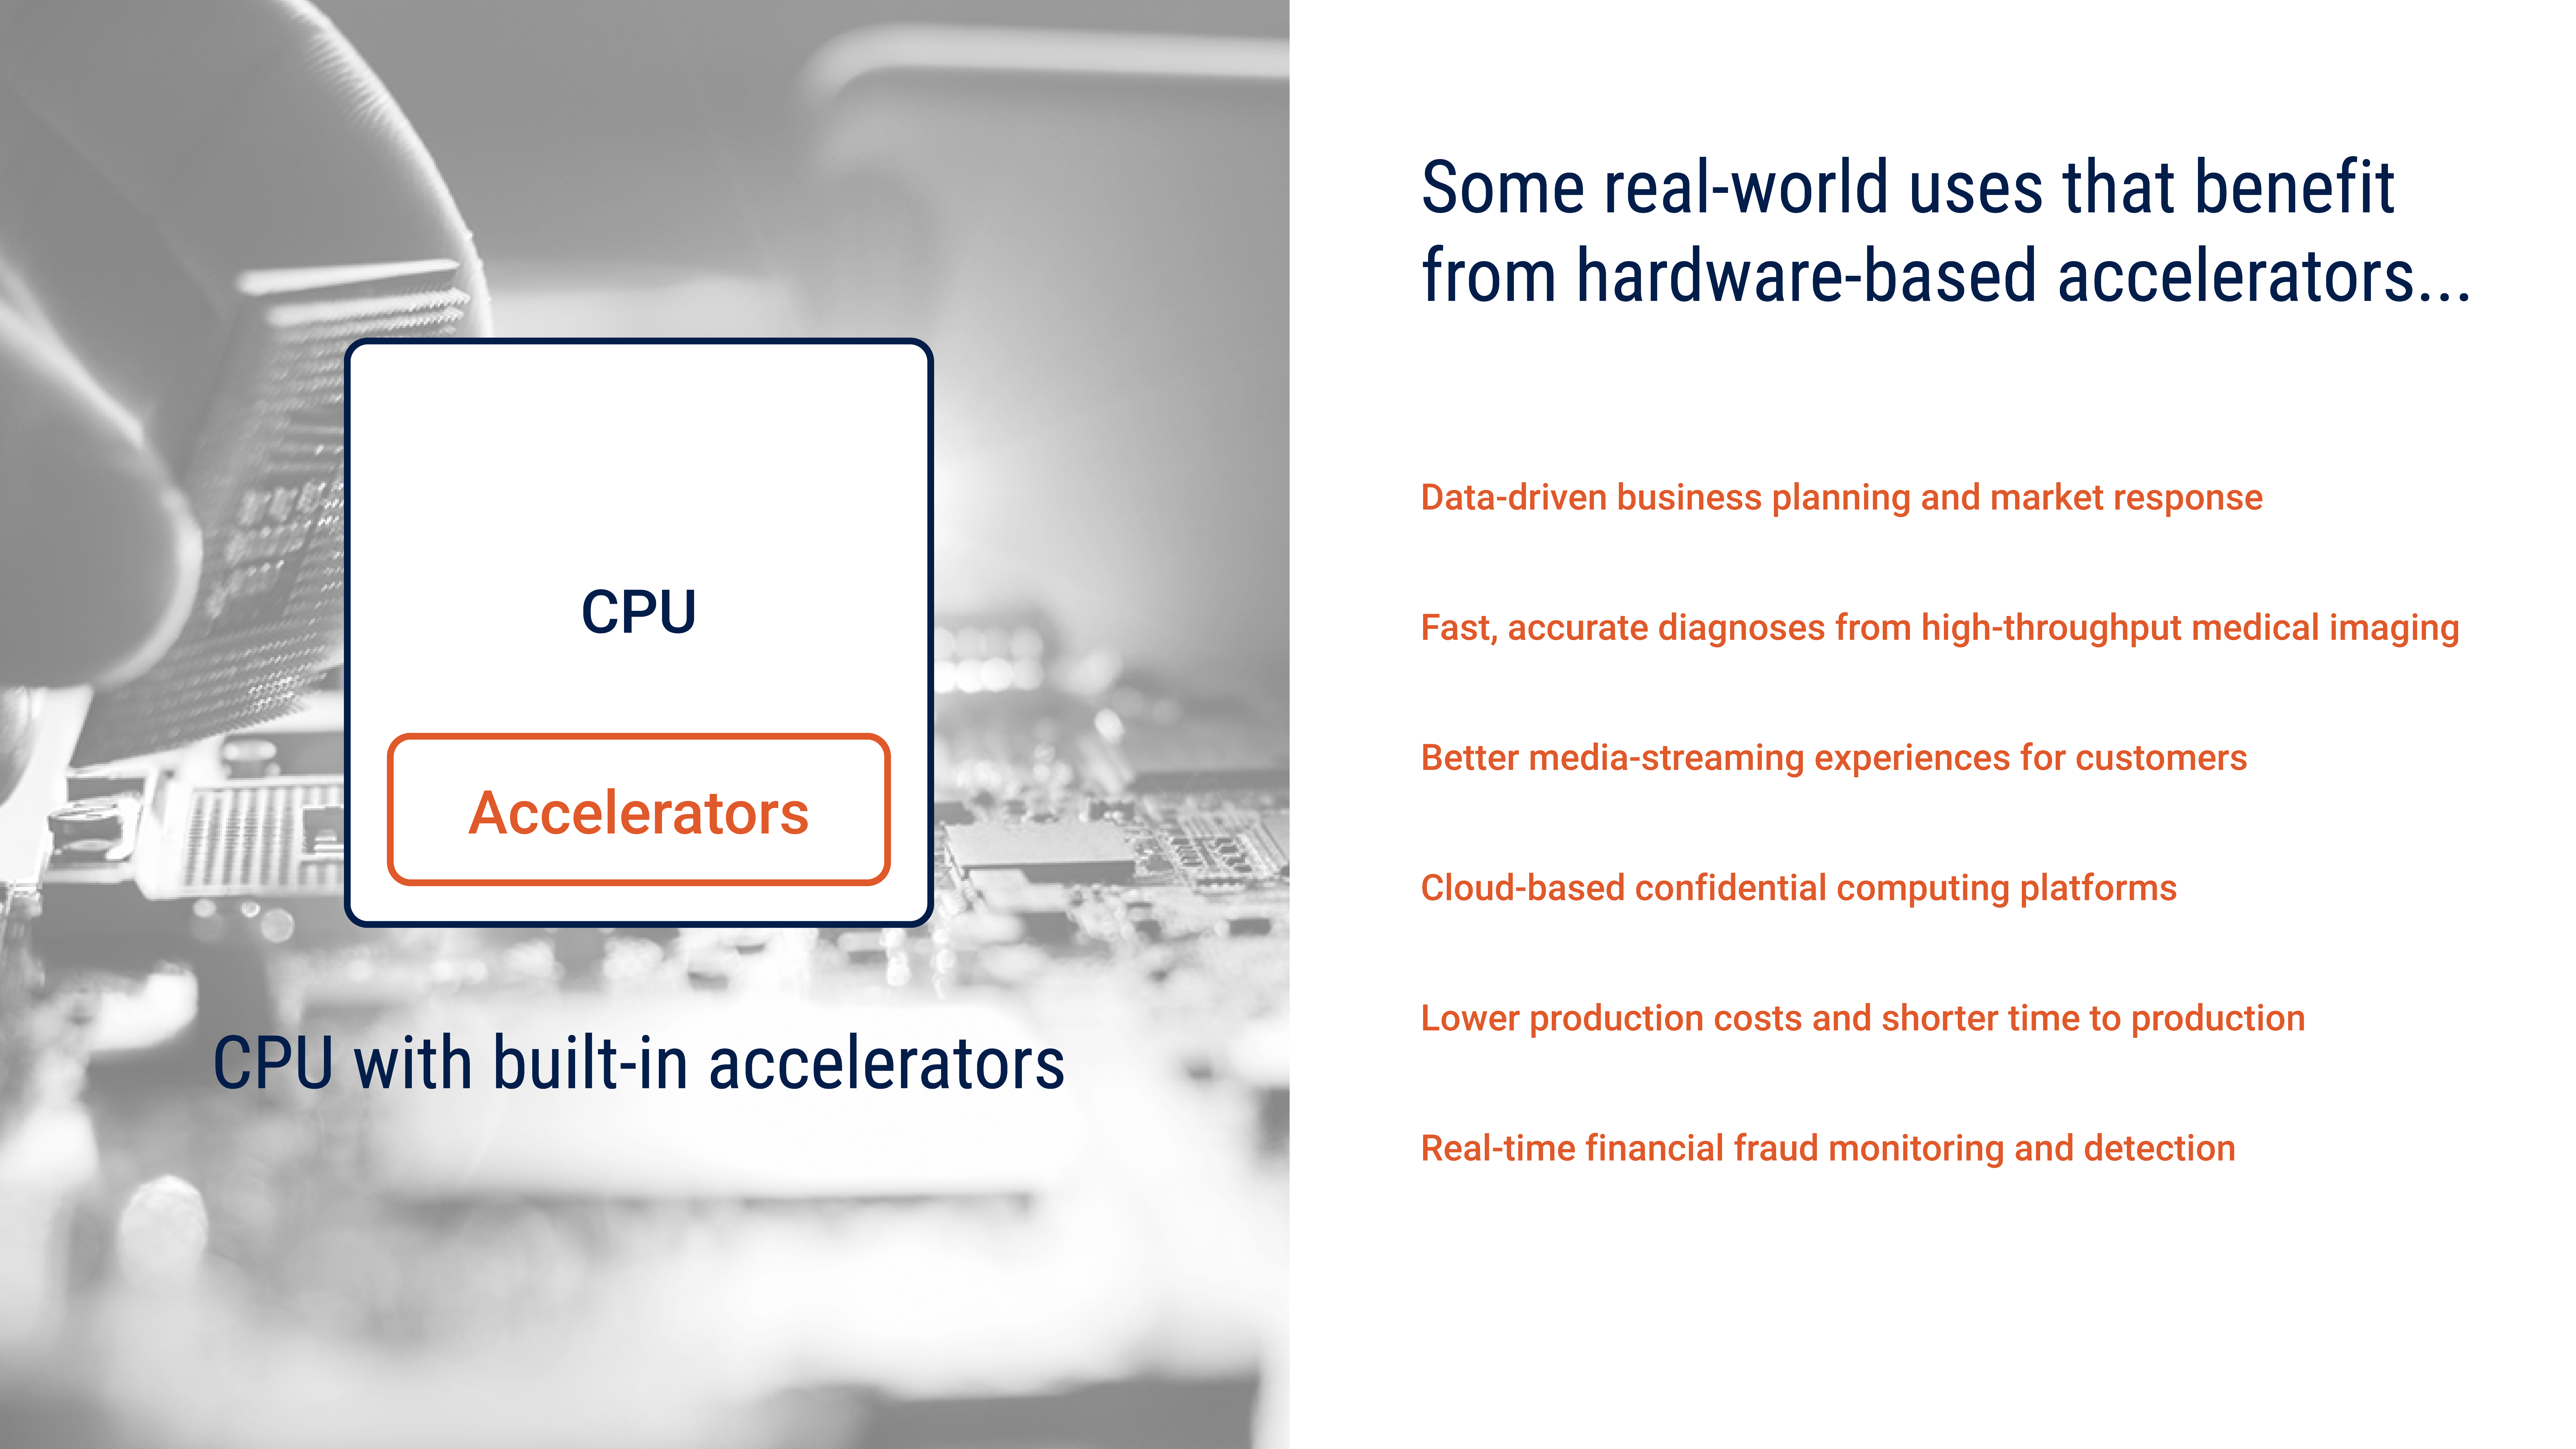 Diagram titled “Some real-world uses that benefit from hardware-based accelerators…” Below the title is a list of six uses: Cloud-based confidential computing platforms; data-driven business planning and market response; lower production costs and shorter time to production; fast, accurate diagnoses from high-throughput medical imaging; real-time financial fraud monitoring and detection; better media-streaming experiences for customers. Below the list of uses is a group of boxes labeled “CPU with built-in accelerators” topped with an upward-pointing arrow. The group consists of one box labeled “accelerators” sitting inside a larger box labeled “CPU.”